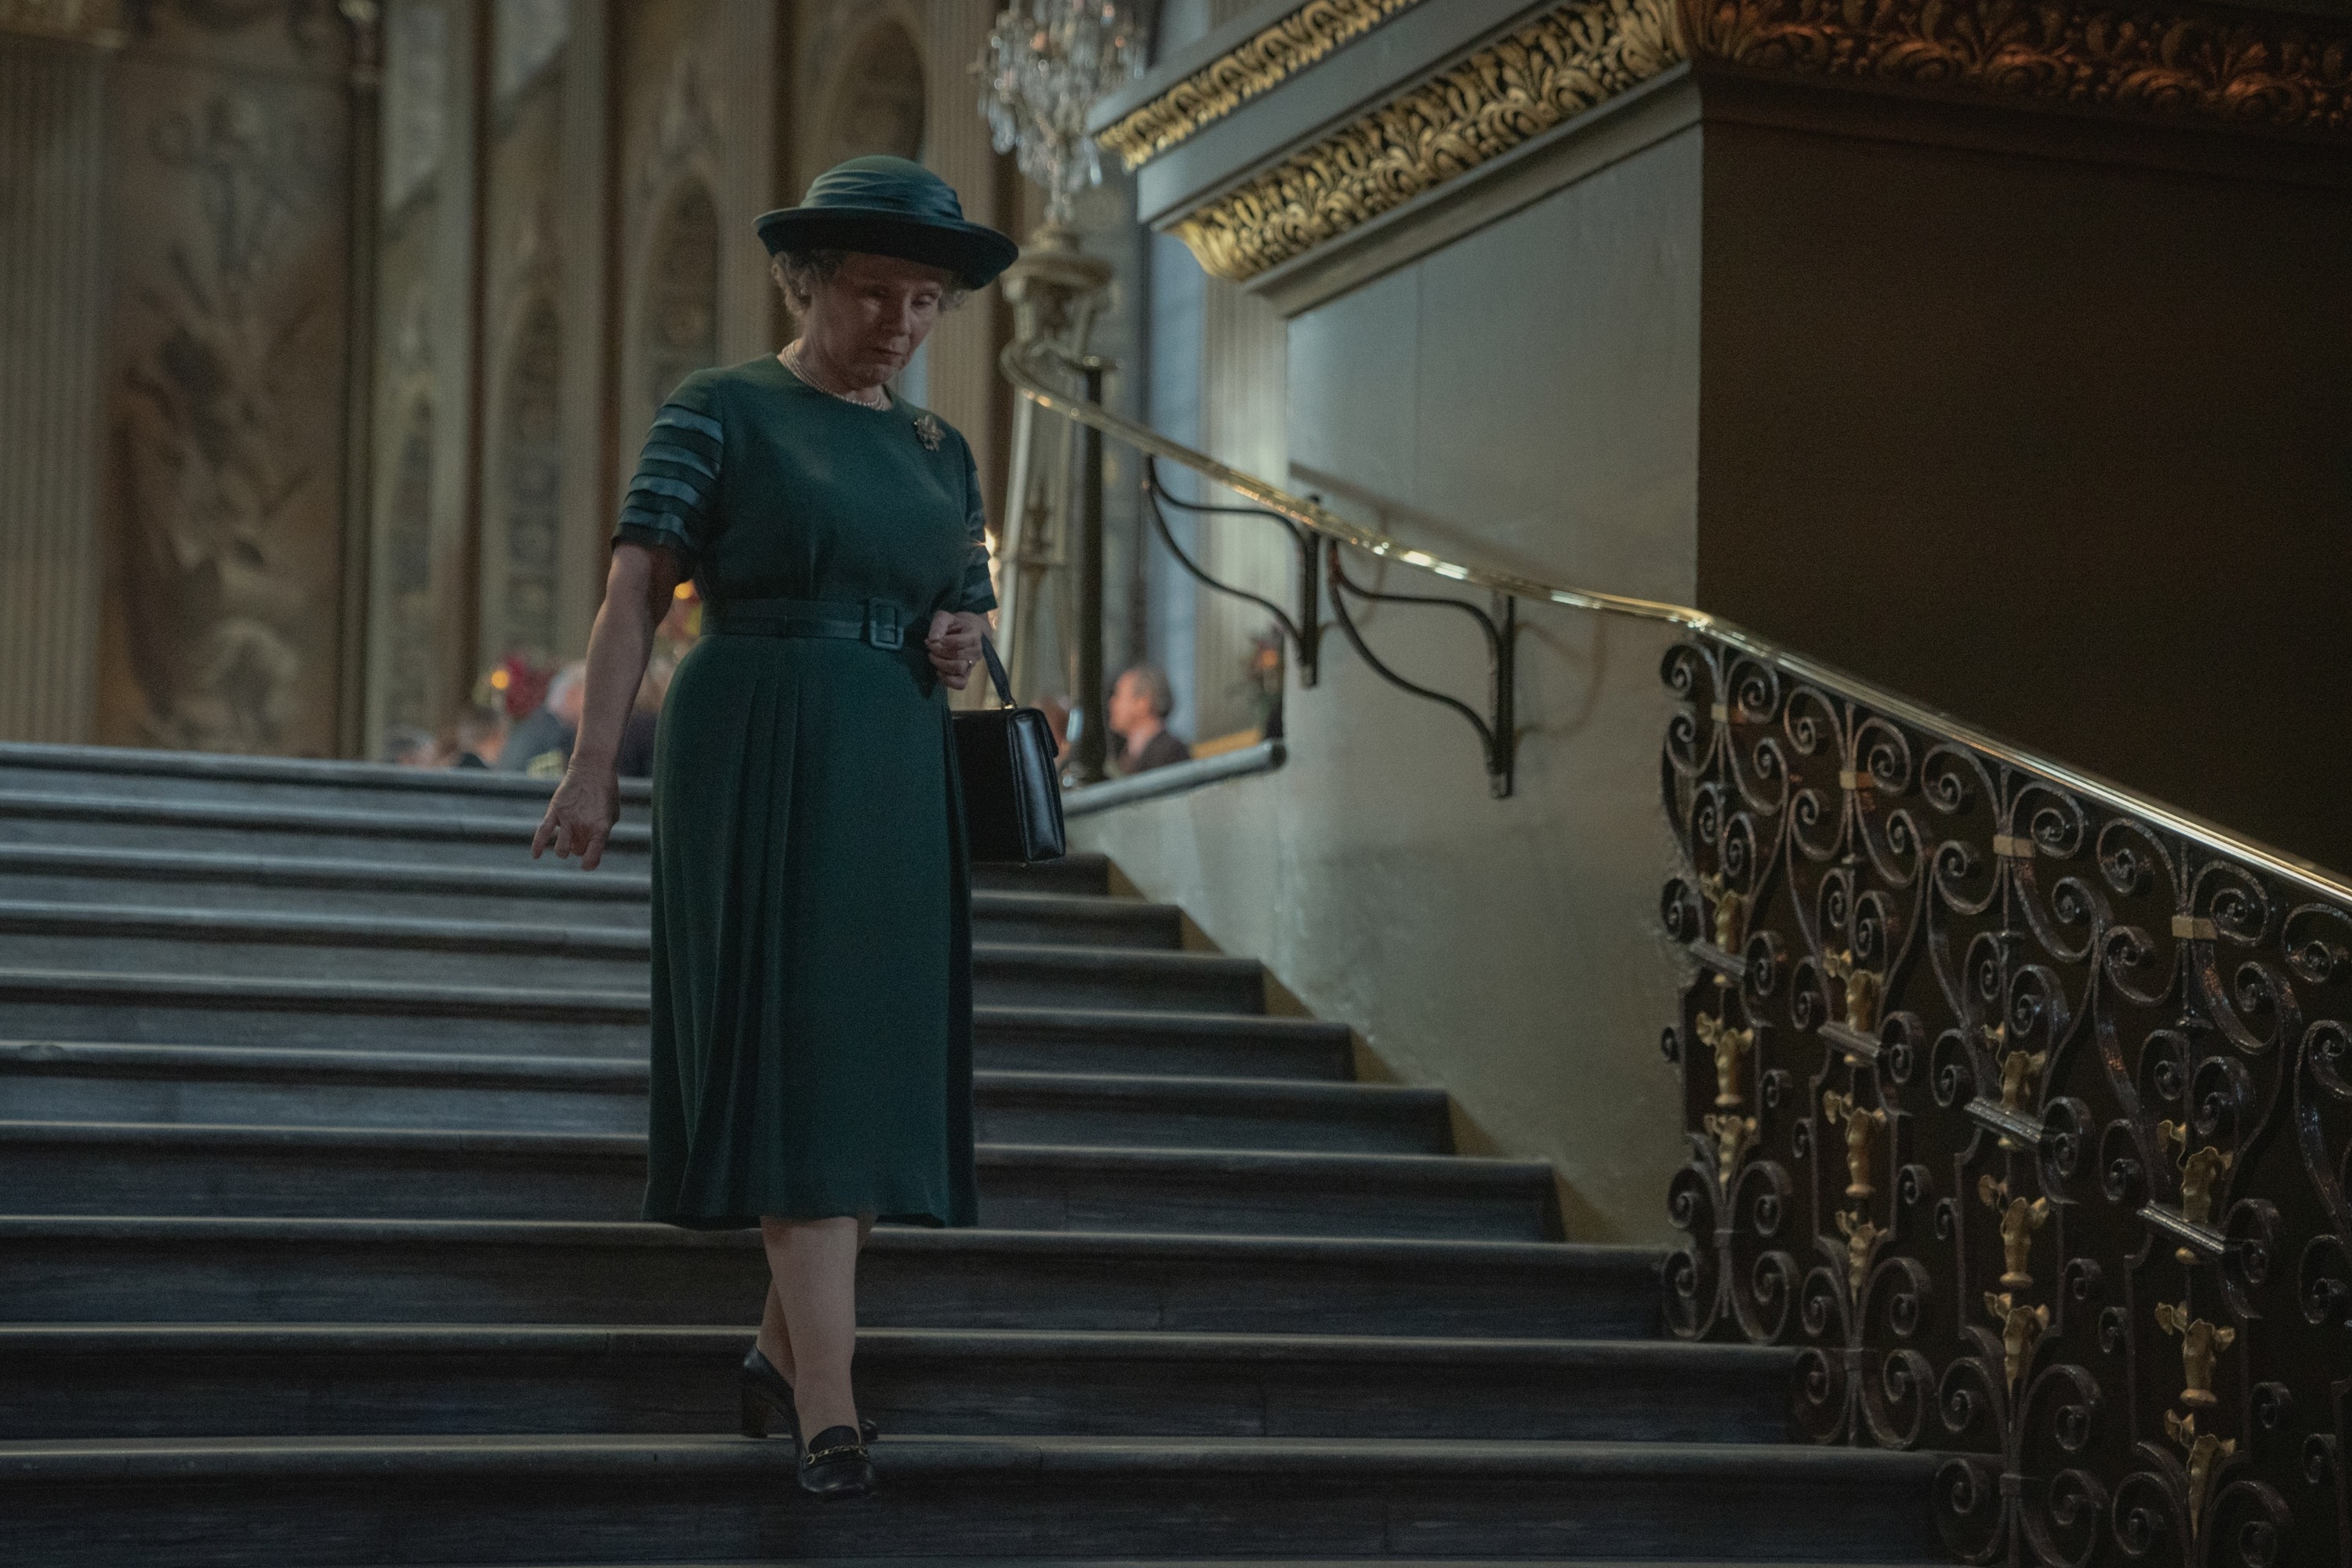 The Queen walking down a flight of stairs in the series